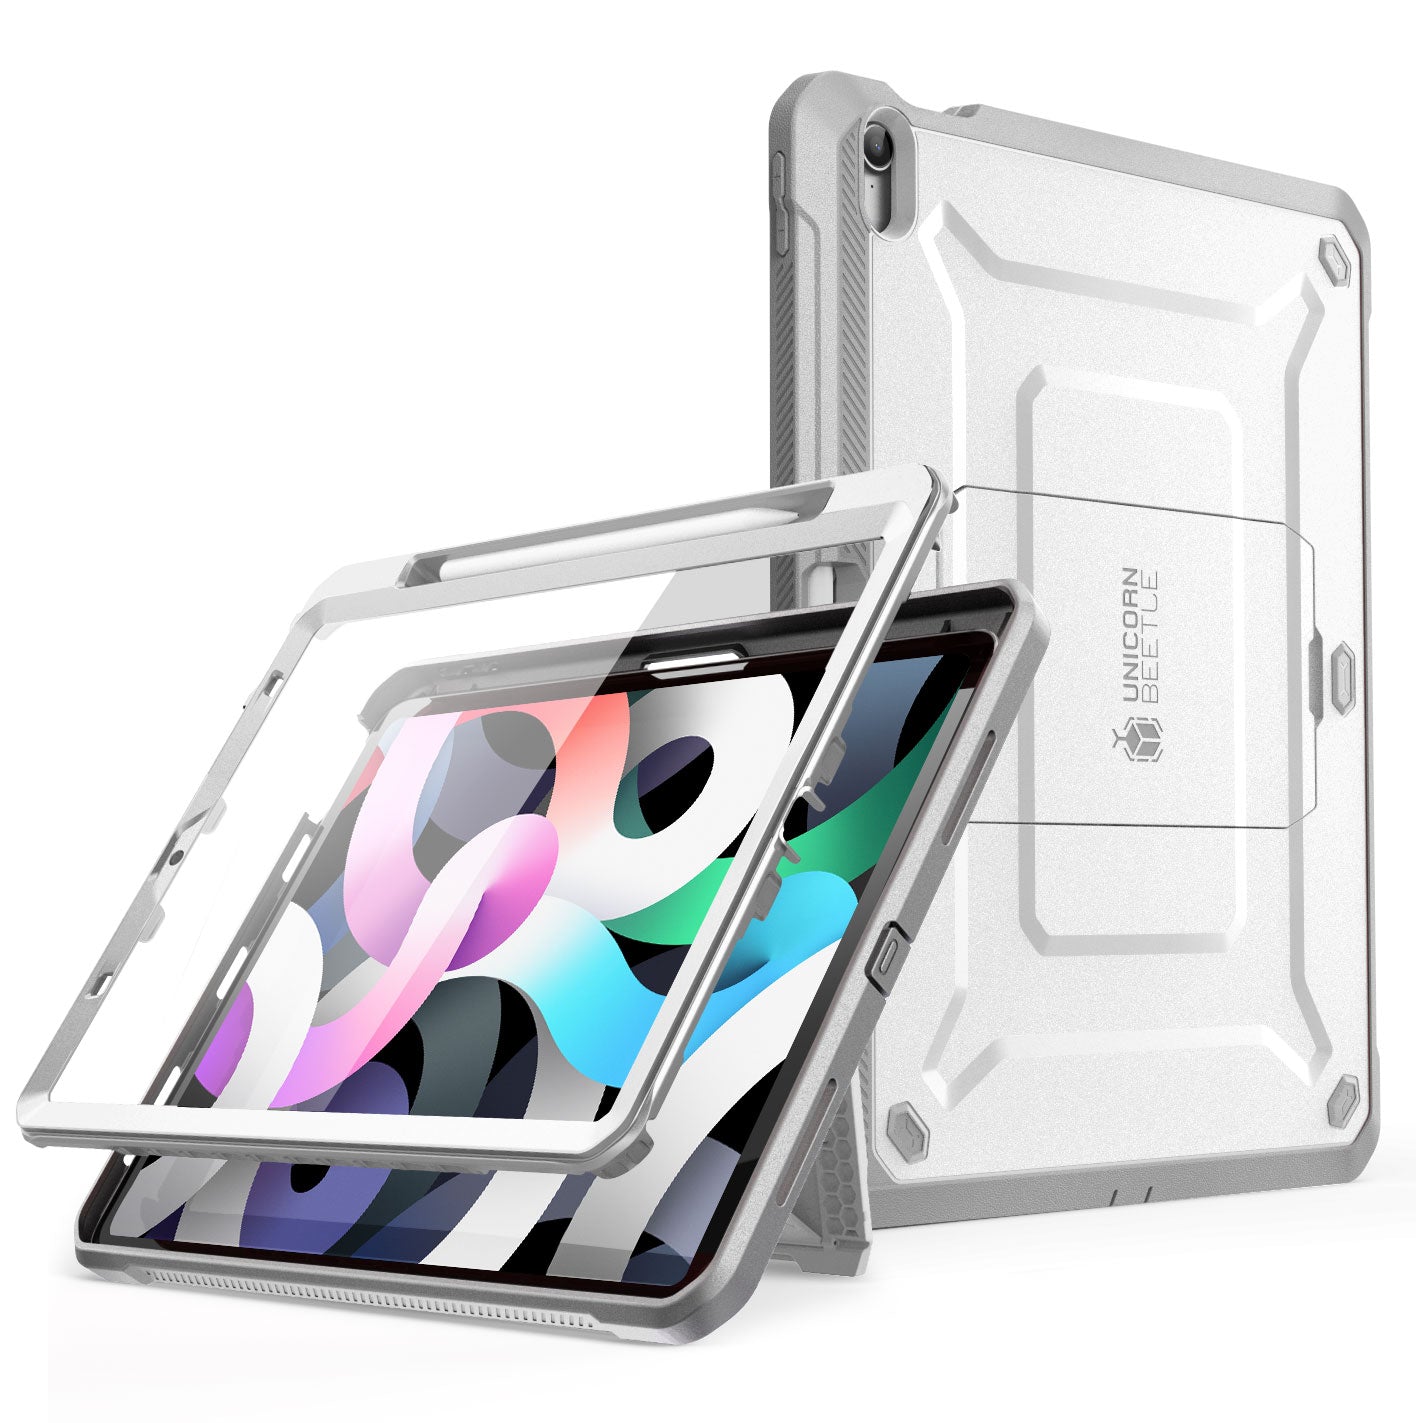 Supcase Unicorn Beetle Pro Rugged Case with Kickstand for iPad Air 10.9" (2020/2022)